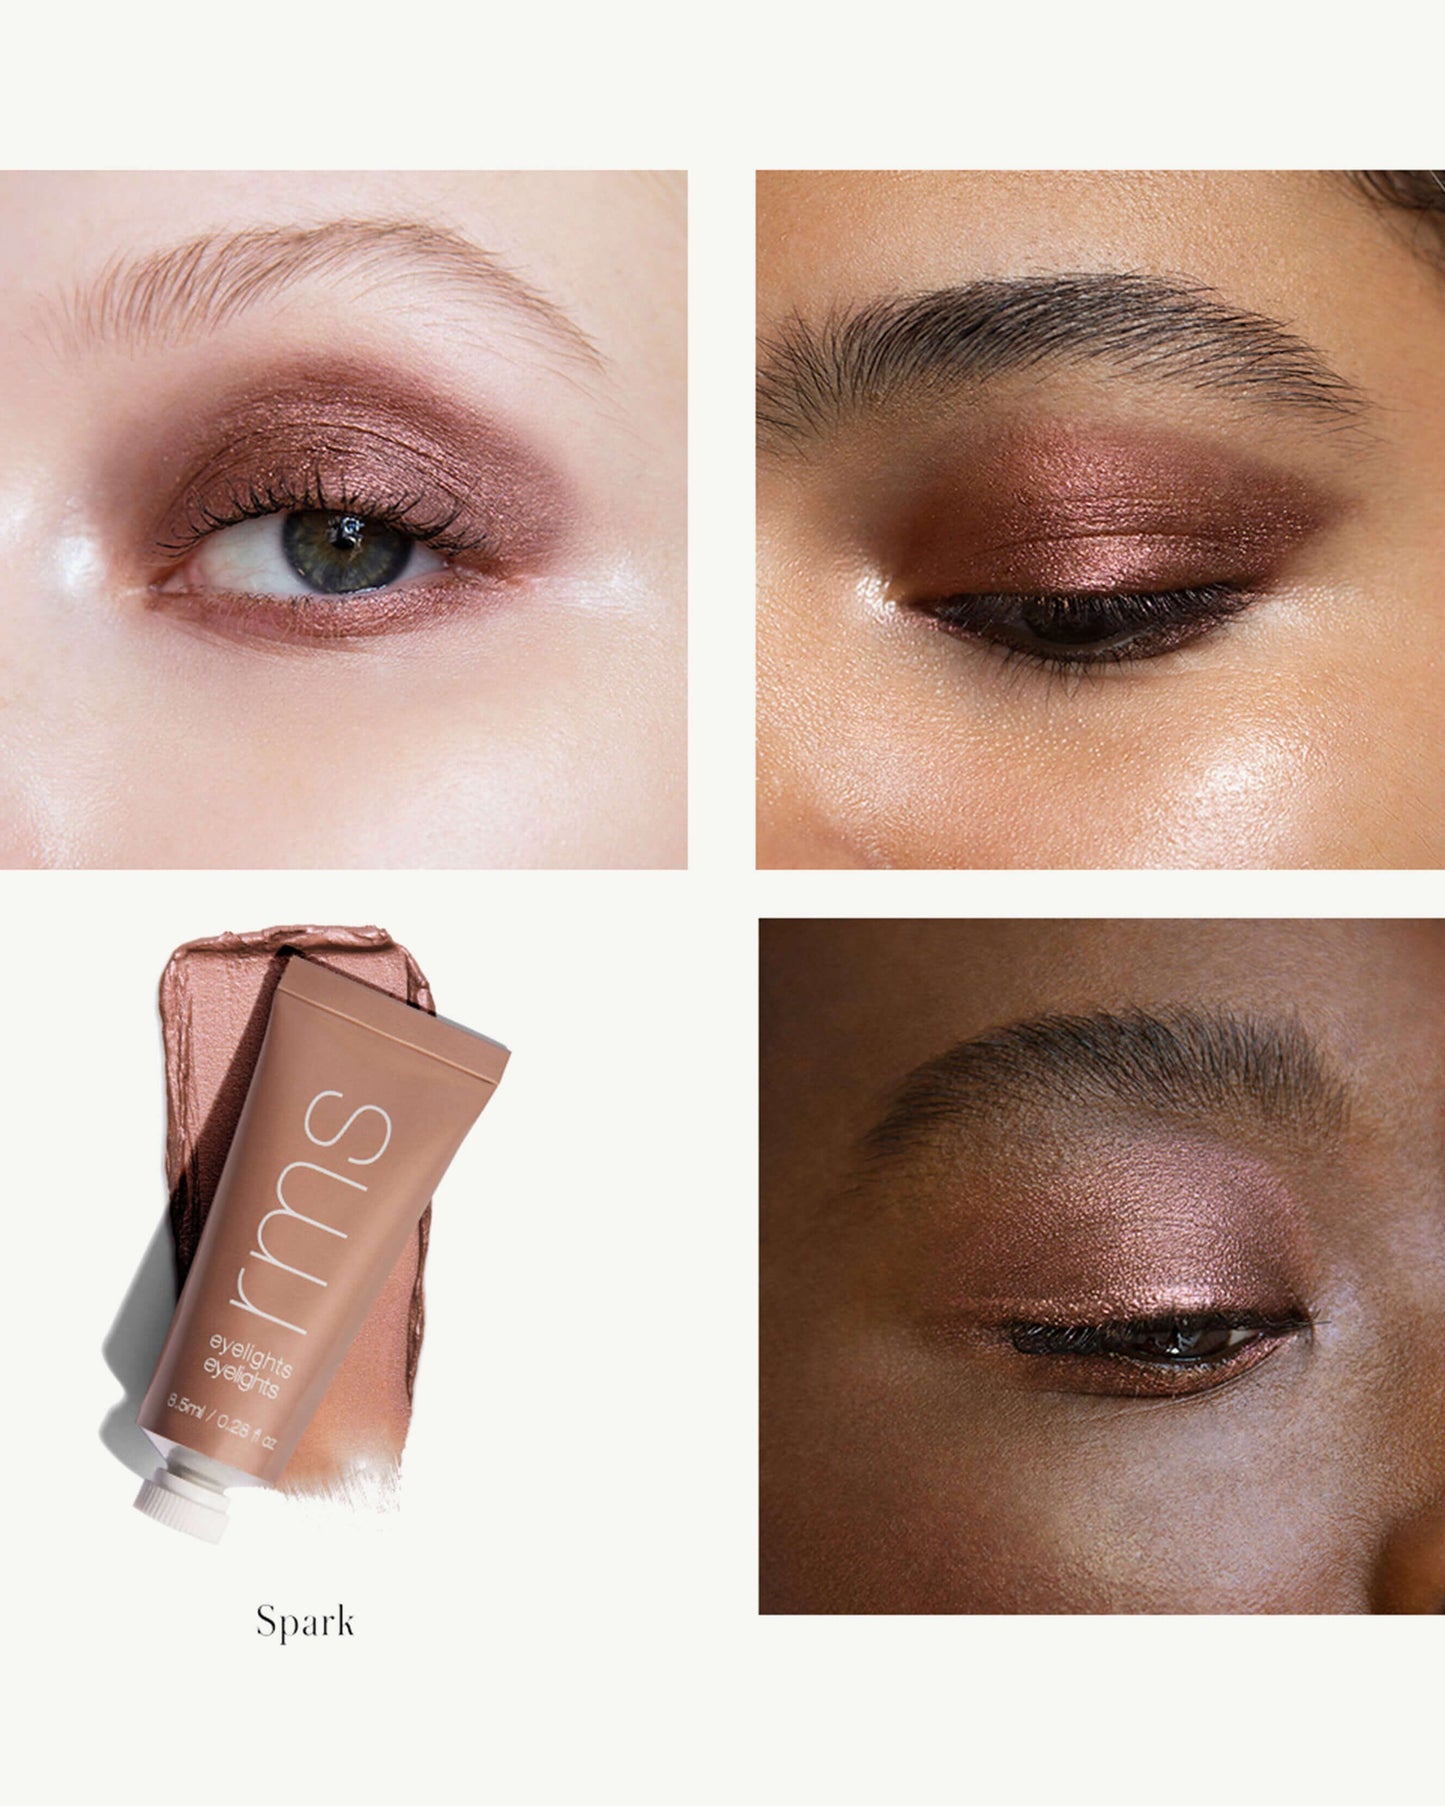 Spark (bronzed plum with a hint of violet)